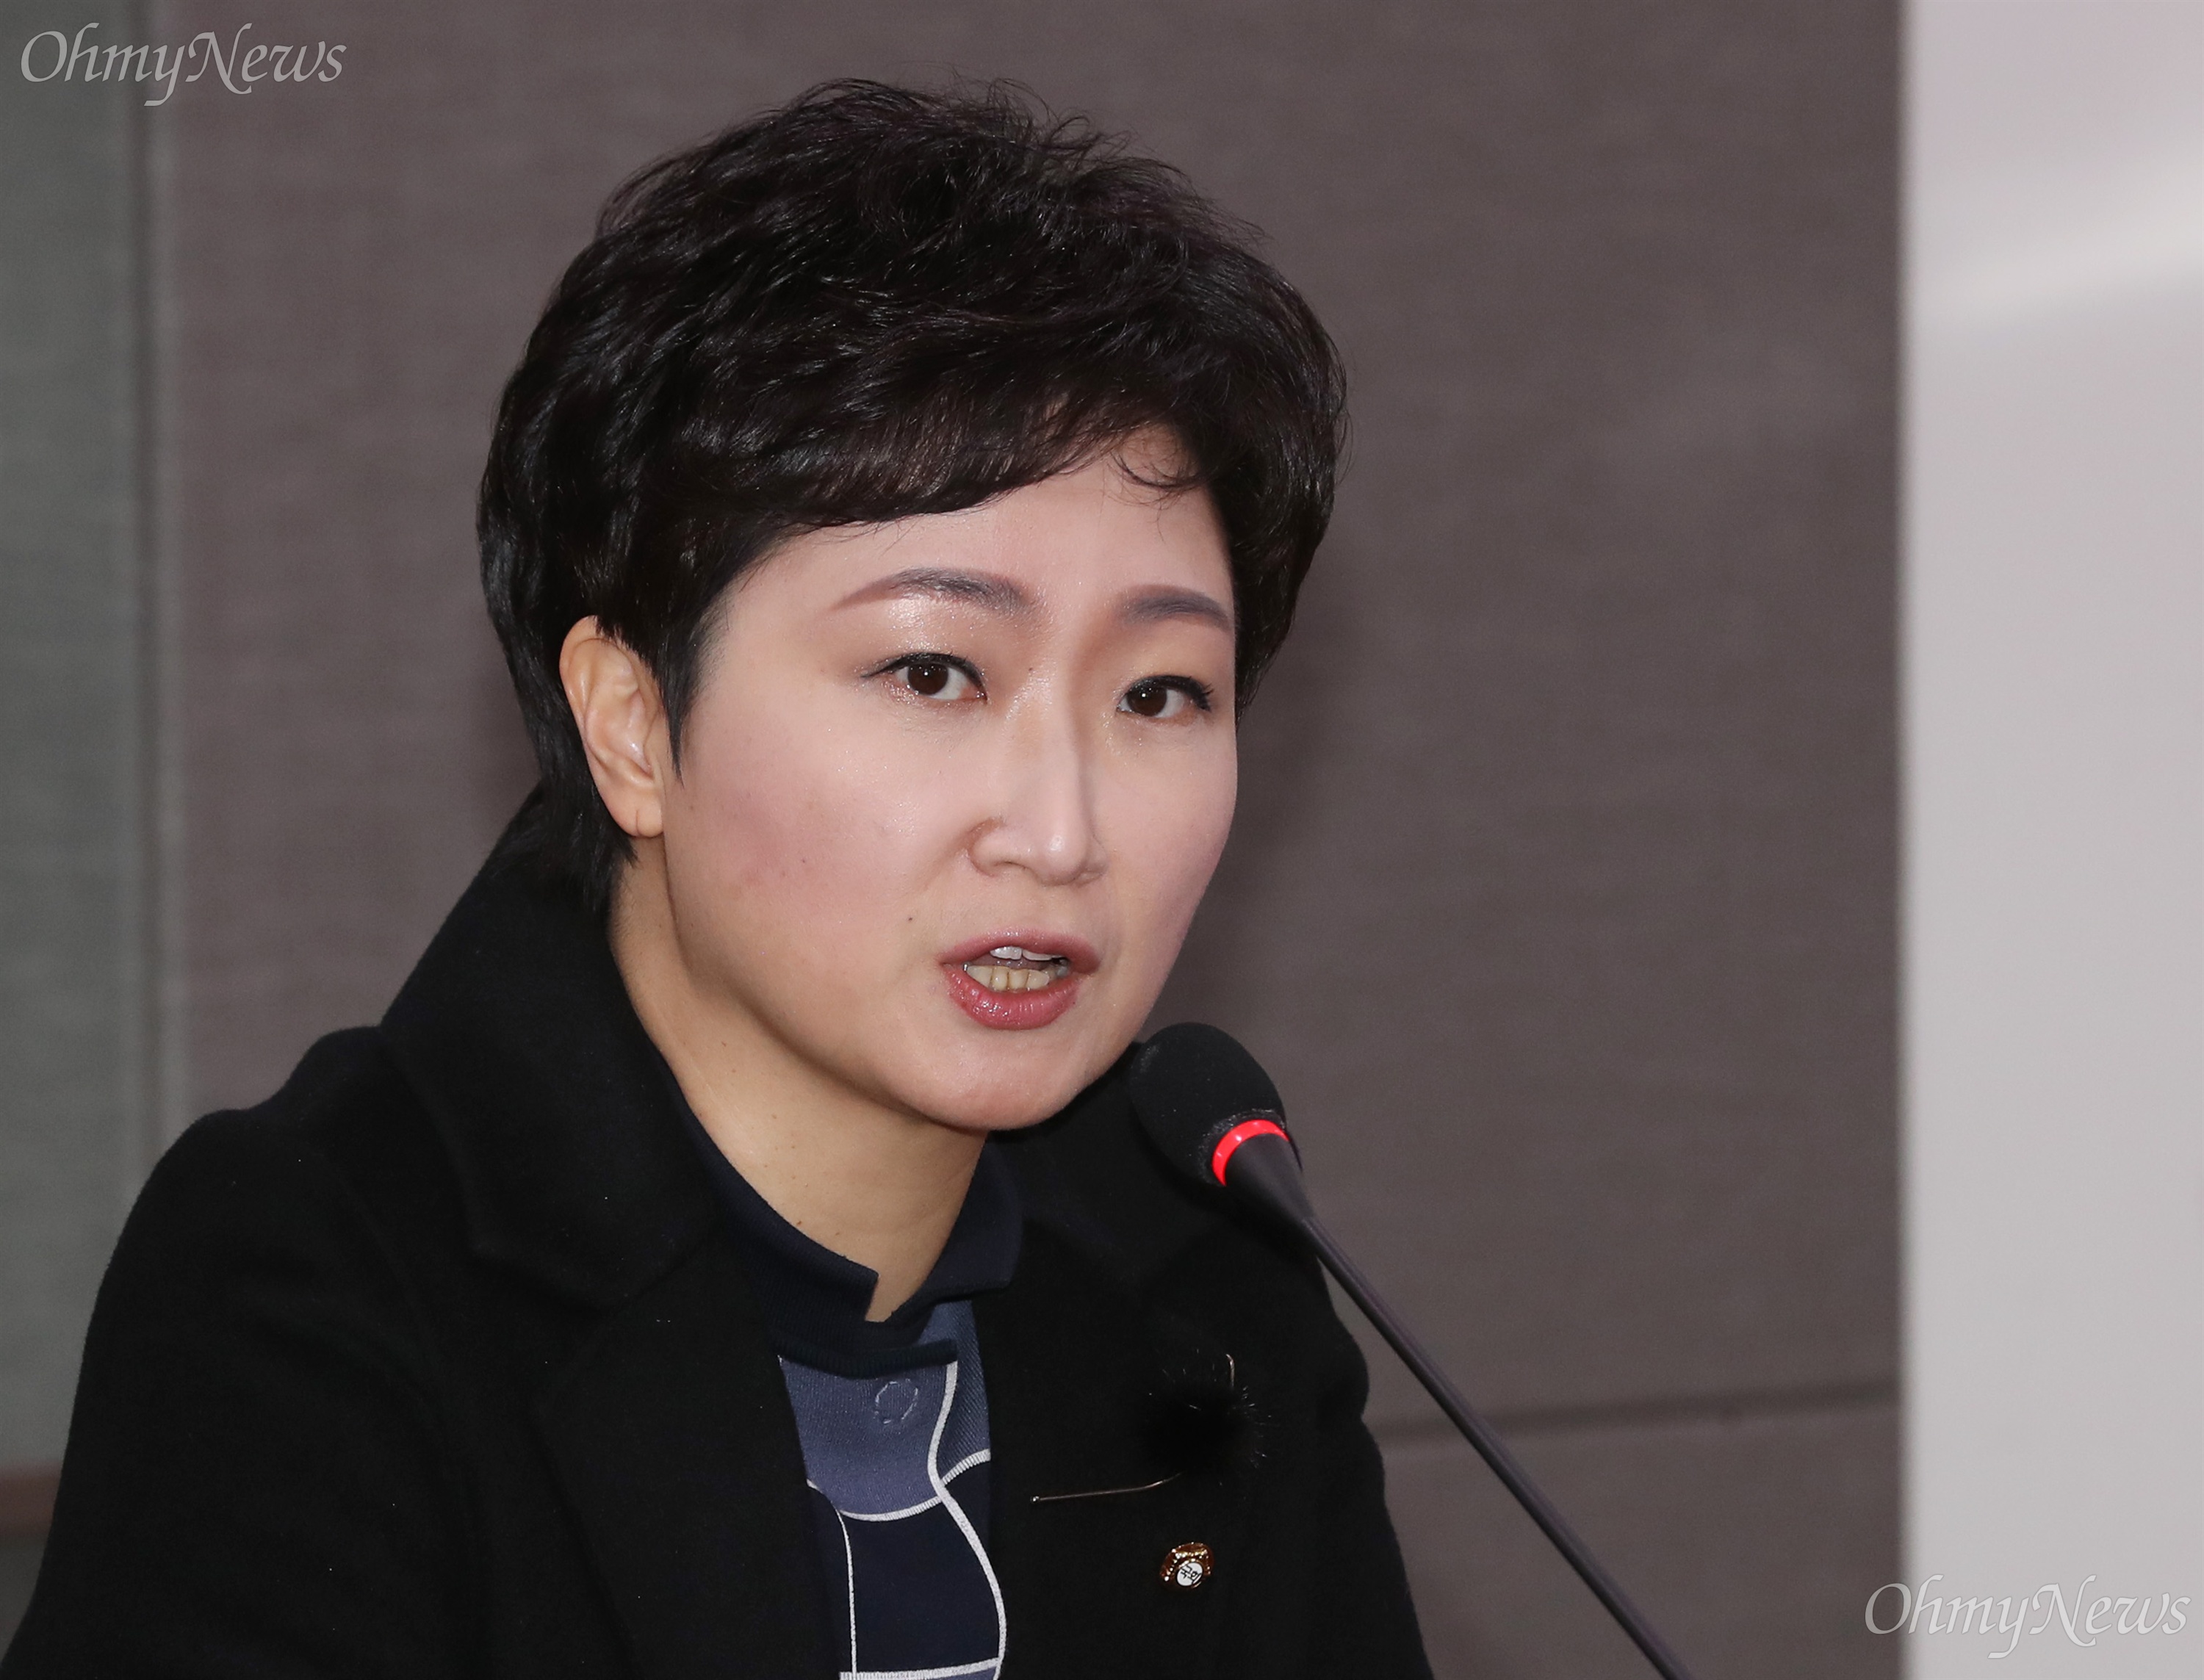 Jung Woo-sung, youre in your house, were against it.It is one of more than 4,000 portal comments posted by Rep. Lee Un-ju, a so-called best comment that received as many as 10,000 recommendations.In the end, someone is sympathetic to their strategies, such as Lee, who separates his people from others and raises discrimination through exclusion and disgust.In the same vein, Lee summoned another hitter to try to scratch what he called a scratch.Moreover, Korea is already receiving enough refugees, including millions of elderly people, hundreds of thousands of North Korean refugees (defectors), Korean and their surroundings who have acquired nationality.In addition to this, it is also a matter for the sovereign people to decide whether we should receive refugees with so different cultures. Lee Un-ju, an active member who identifies refugee issues with foreign workers, defectors and Chinese compatriots, is not the first time Jeju Island Yemen.Again, last time, his argument was the sameSo we have to respect their human rights for these sex minorities, homosexuals.I agree with that, but it is a little too much to say that it should not oppose this part of the evaluation of homosexuality.So I think that banning this is also suppressing the human rights of the opponent. Lee Un-ju, who appeared on KBS1s The Late Night Discussion of Eom Kyung-chul and The Anti-Discrimination Act against Sexual Minority broadcast in October last year, made a strange logic of the human rights of (minority) opponents.This logic led to the logic that the anti-discrimination law is the anti-discrimination law and human rights are respectable, but we should not suppress the opposition.It sounds like a claim that women should not be suppressed by a series of misogyny (the violence that is revealed through women discrimination).The logic is that human rights should be respected, but should not be suppressed or discriminated against people with disabilities, or that human rights should be respected but not suppressed by Shiv Sena.According to The Report, reported in mid-month, many of the Uzbekistans of the Al Qaeda-based armed group in Syria asked to be deported to Korea via Turkey because of the stay of 20,000 to 20,000 Uzbekistan workers in Korea.The Security Council The Report also added that some of the Uzbekistan workers in Korea have been extreme, and there have been reports of member states funding the extremists entering Syria.In this regard, the Ministry of Justice said on February 14, We obtained the report of the UN Security Council and immediately strengthened the entry examination of Uzbekistan people entering the country from Turkey, and thoroughly grasped the specific trends that occur at home and abroad. I gave a warning to strengthen the examination.He also said, We will strengthen cooperation with international organizations and foreign governments and will do our utmost to prevent terrorism.Since then, no news has been heard about the Korean people involved in the al Qaeda armed organization or Uzbekistan in Korea.Lees media play seems to be free from criticism that it encourages and uses the fear of terrorism for opposition to refugees and hate politics.Lee was also the representative of the revision bill of the Refugee Act, which included the reduction of the treatment of refugee recognition, the elimination of the applicants living expenses, and the elimination of education guarantees in July last year.This time, Lee fell over the actor Jung Woo-sung, a goodwill ambassador for the United Nations Refugee Organization.Two news items that Rep. Lee Un-ju should be paying attention to:But there is a separate news that he should walk and fall.JTBC <The Newsroom> reported on the 4th that foreign Illegal workers occupied domestic apartments and most of the construction sites, and that children who died of illness at refugee camps in Syria and Iraq border area, which were the last camps of IS, are continuing.Young children dying without even getting refugee status, Rep. Lee Un-ju may dismiss it as just an abstract problem, as he wrote on Facebook.Such a sea (relevant article: even the elimination of living costs) recommends that you listen to the voice of the Refugee Human Rights Center, which appeals to Lee, We cannot take away the future of (refugee) children with the fictional slogan that the interests of our own people are first.What is the reality that our construction companies are gu Longing Illegal workers instead of their own workers through brokers to maintain cheap labor?Its not because there are a lot of Illegal workers.Construction companies are taking responsibility for brokers to take advantage of the cheap labor force, and they are tolerated by Illegal while ignoring their own workers.In an interview with The Newsroom, Yook Gil-soo, the secretary general of the Korean Confederation Industrial Union, said:It is natural for companies to improve their environment and raise wages in order to attract domestic workers, and because they give up and draw foreign workers who are low-wage workers, they keep (foreigner Illegal employment through brokers) intact.Is it appropriate to encourage fear by putting the number of foreign workers and related issues behind him and threatening terrorism for his political assets and the logic of the right camp?If you are an active member of the National Assemblys Industrial and Trade Resource Small and Medium Venture Business Committee, it is not a priority to try to improve the Illegal Gu Long reality of the nearby construction site rather than promoting the risk of terrorism related to the refugee issue.Unfortunately, not everyone is given such an opportunity - in that respect, I think Im lucky and Im doing my job of making the Korean public aware of the refugees with a greater sense of duty.It is part of a presentation Jung Woo-sung read at the Refugee by Us talk concert (Relevant article: A sudden confession by Jung Woo-sung, who was talking about refugee hatred, Im a lucky man).The first sentence is enough to create an illusion that Jung Woo-sung seems to ask Lee Un-ju, who is entertainer toward him.If we meet a lot of children who are still losing their lives in the refugee camps in Syria and Iraq borders, can Lee still overstate the political slogan warmness and humanitarianism need to be distinguished or the interests of his people first?If not, why not visit Jeju Island, which seems to have never had an official schedule since the refugee crisis of Jeju Island Yemen, and witness the harsh environment of refugees personally.In December last year, the United Nations Shiv Sena Elimination Committee urged the Korean government to enact a comprehensive Shiv Sena Prohibition Act through the National Review, expressing concern about the low refugee recognition rate and the hateful atmosphere of refugees in Korea.Lee Un-ju, a member of the United Nations Security Council, will not need to look at the United Nations terrorism report as well as these refugees and Shiv Sena related The Report.In fact, you dont have to go far.Choi Young-ae, chairman of the Human Rights Commission, who pointed out that the government should reorganize the refugee policy to meet international human rights standards, said on the results of the refugee screening of Jeju Island Yemen.In order not to stick to the logic that human rights are respected, but we should not suppress opposing.The Korean community has become very sensitive to discrimination, and its expectations have increased, and the demands have become very delicate and high, so we live up to this.And this is discrimination, hate. And this is group. Rejected group, group, group, group.How in this relationship really does this really matter in a very different direction and what is the value we have to take together. This is very difficult. The right to oppose sex minorities and refugees? Discrimination and hate talk he should hear